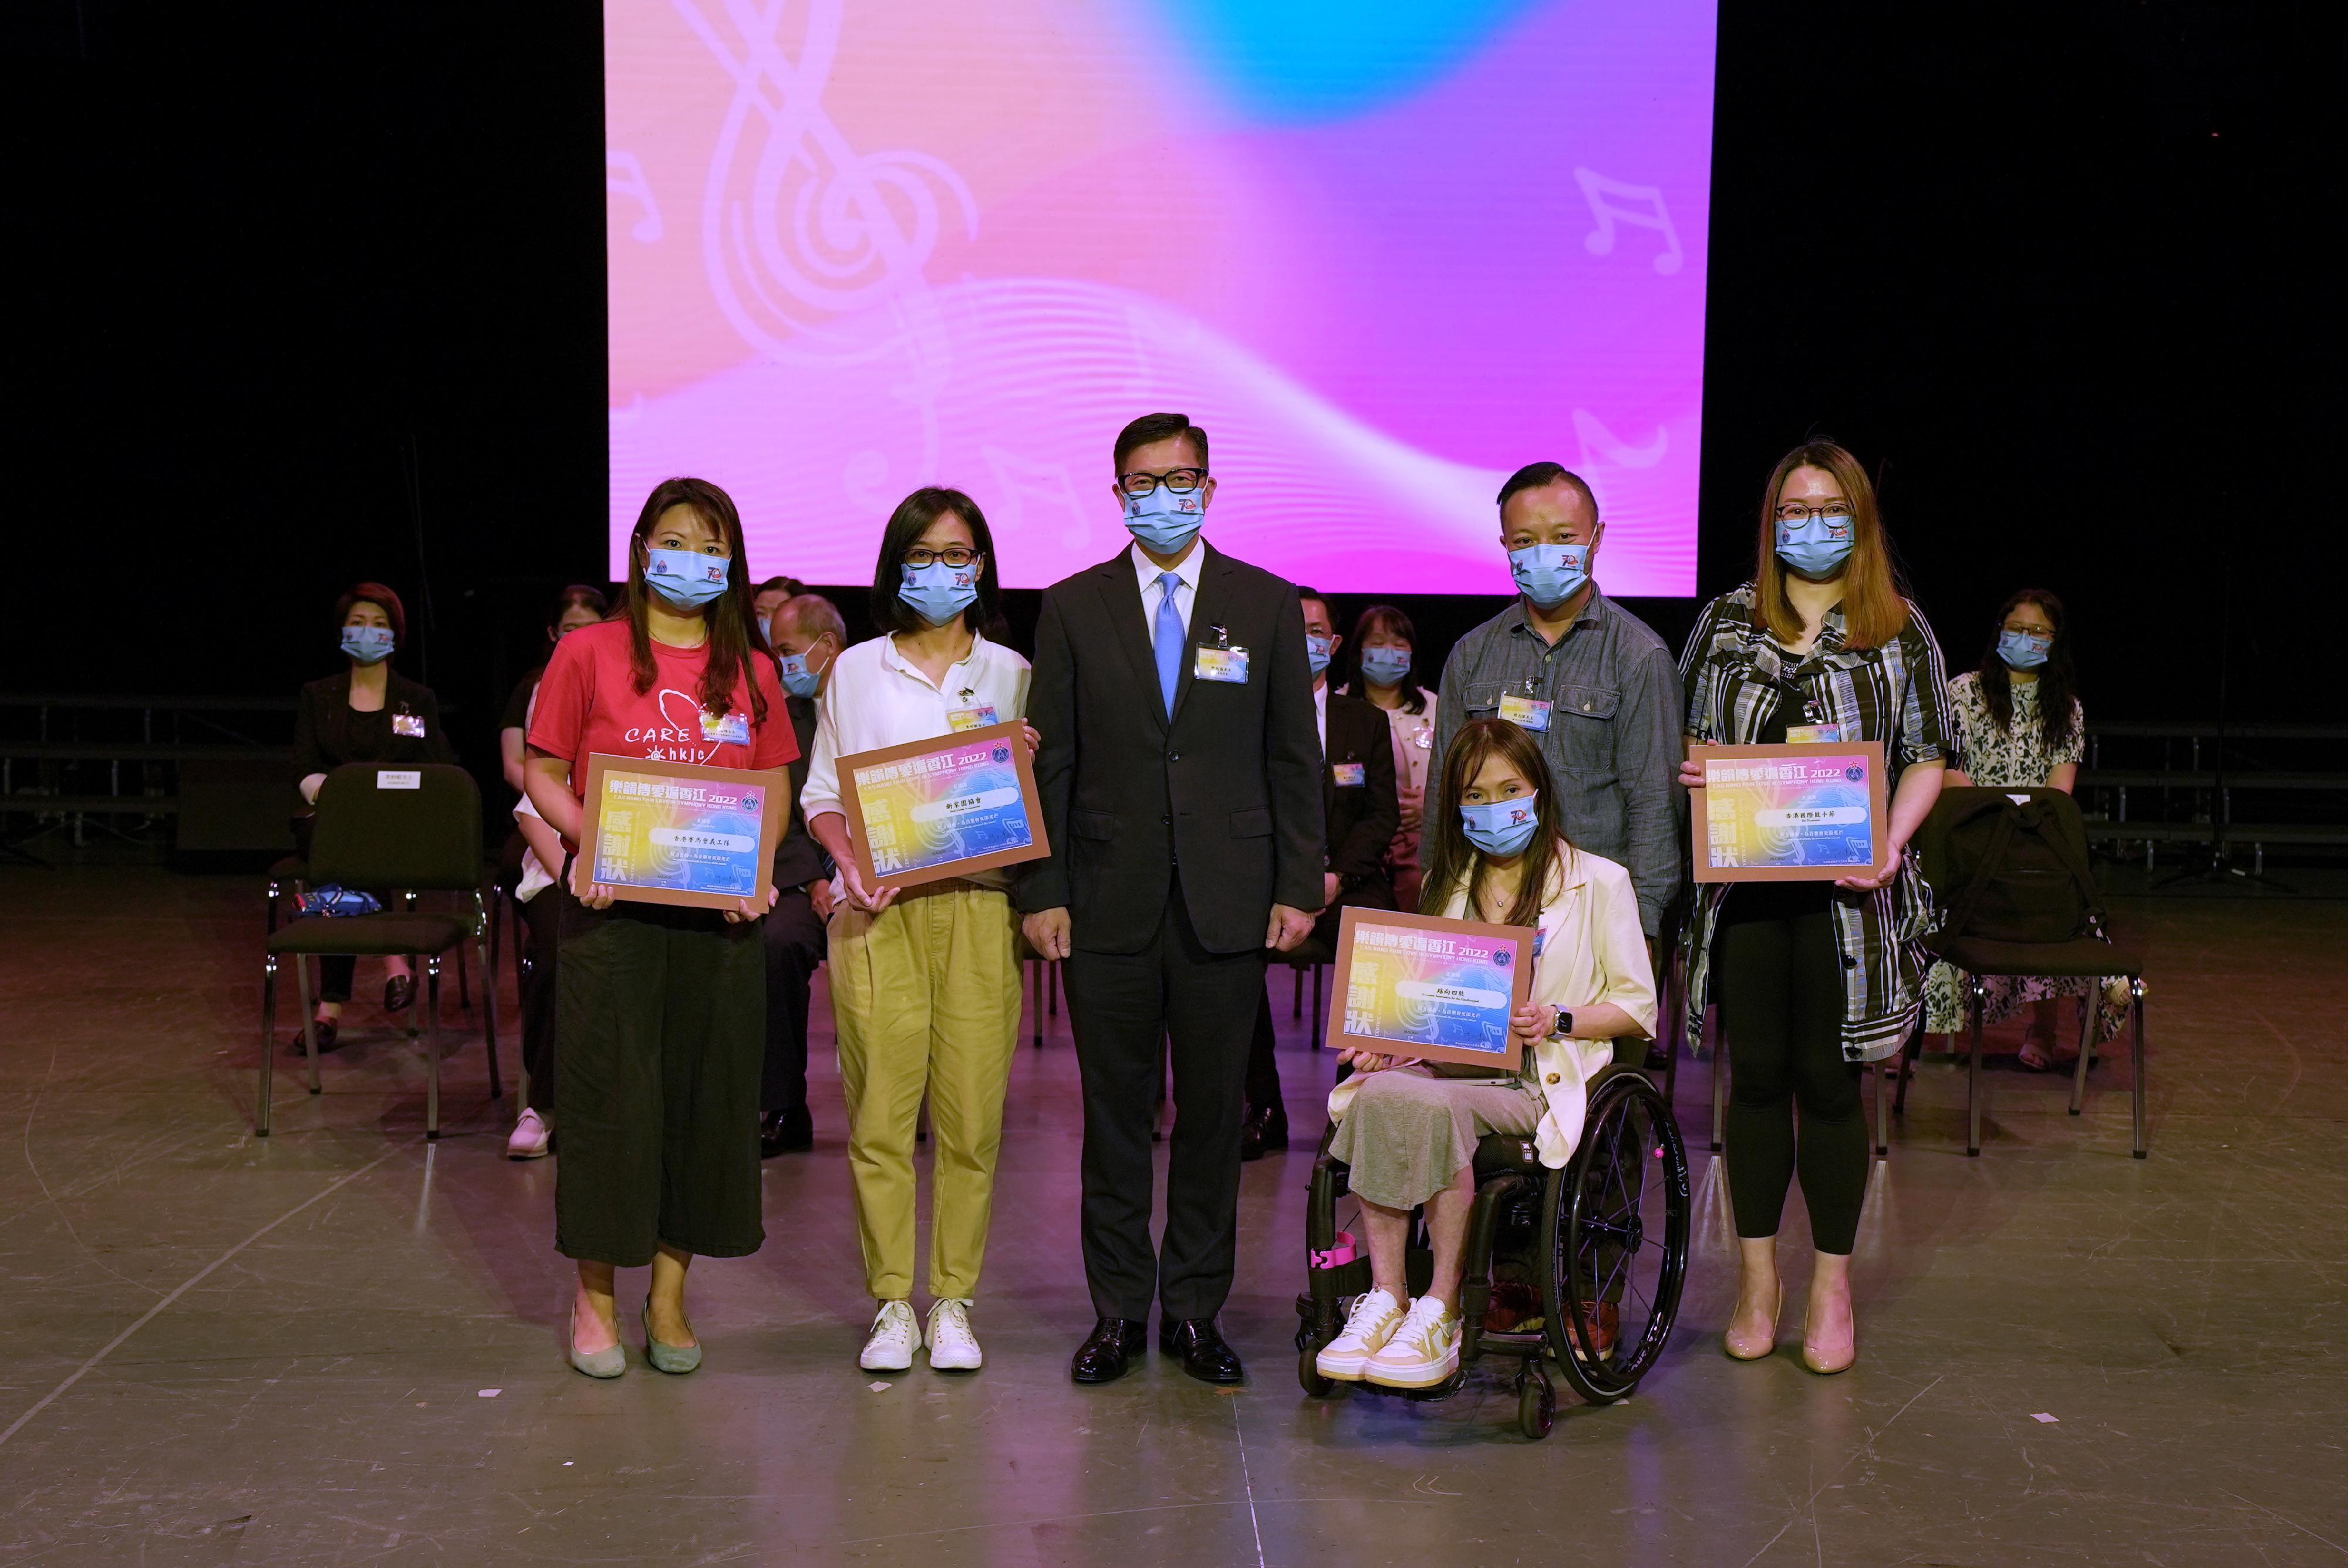 The Secretary for Security, Mr Tang Ping-keung (third left), presents certificates of appreciation to the participating organisations at the music exchange concert "Love in Symphony Hong Kong" today (September 18).